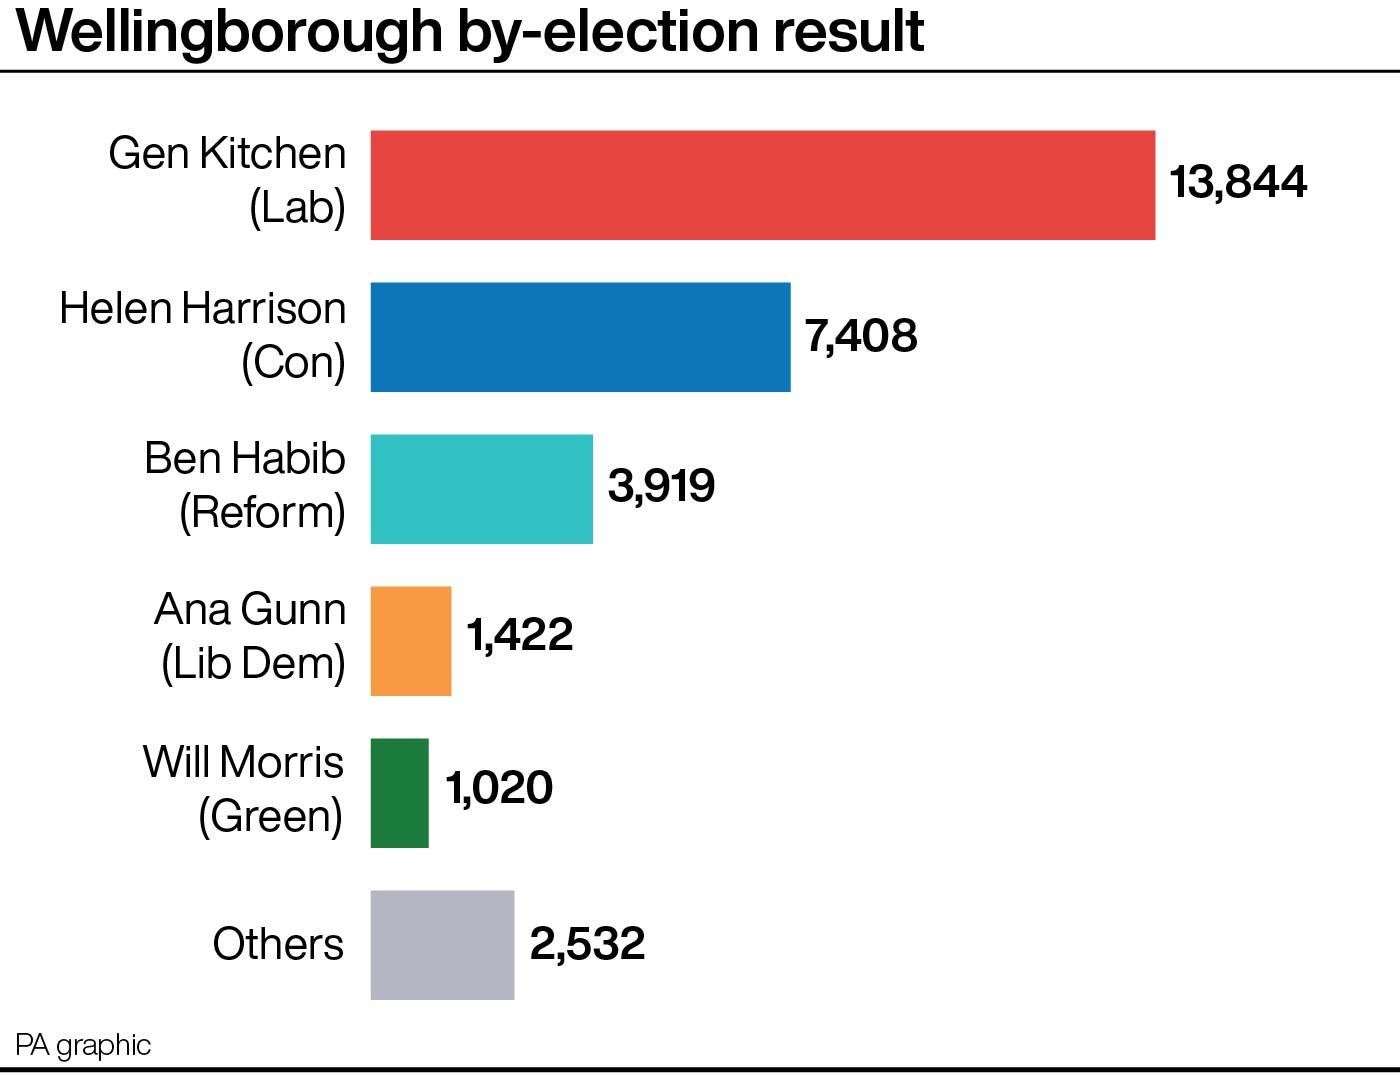 Gen Kitchen secured a majority of more than 6,000 in Wellingborough (PA Graphics)